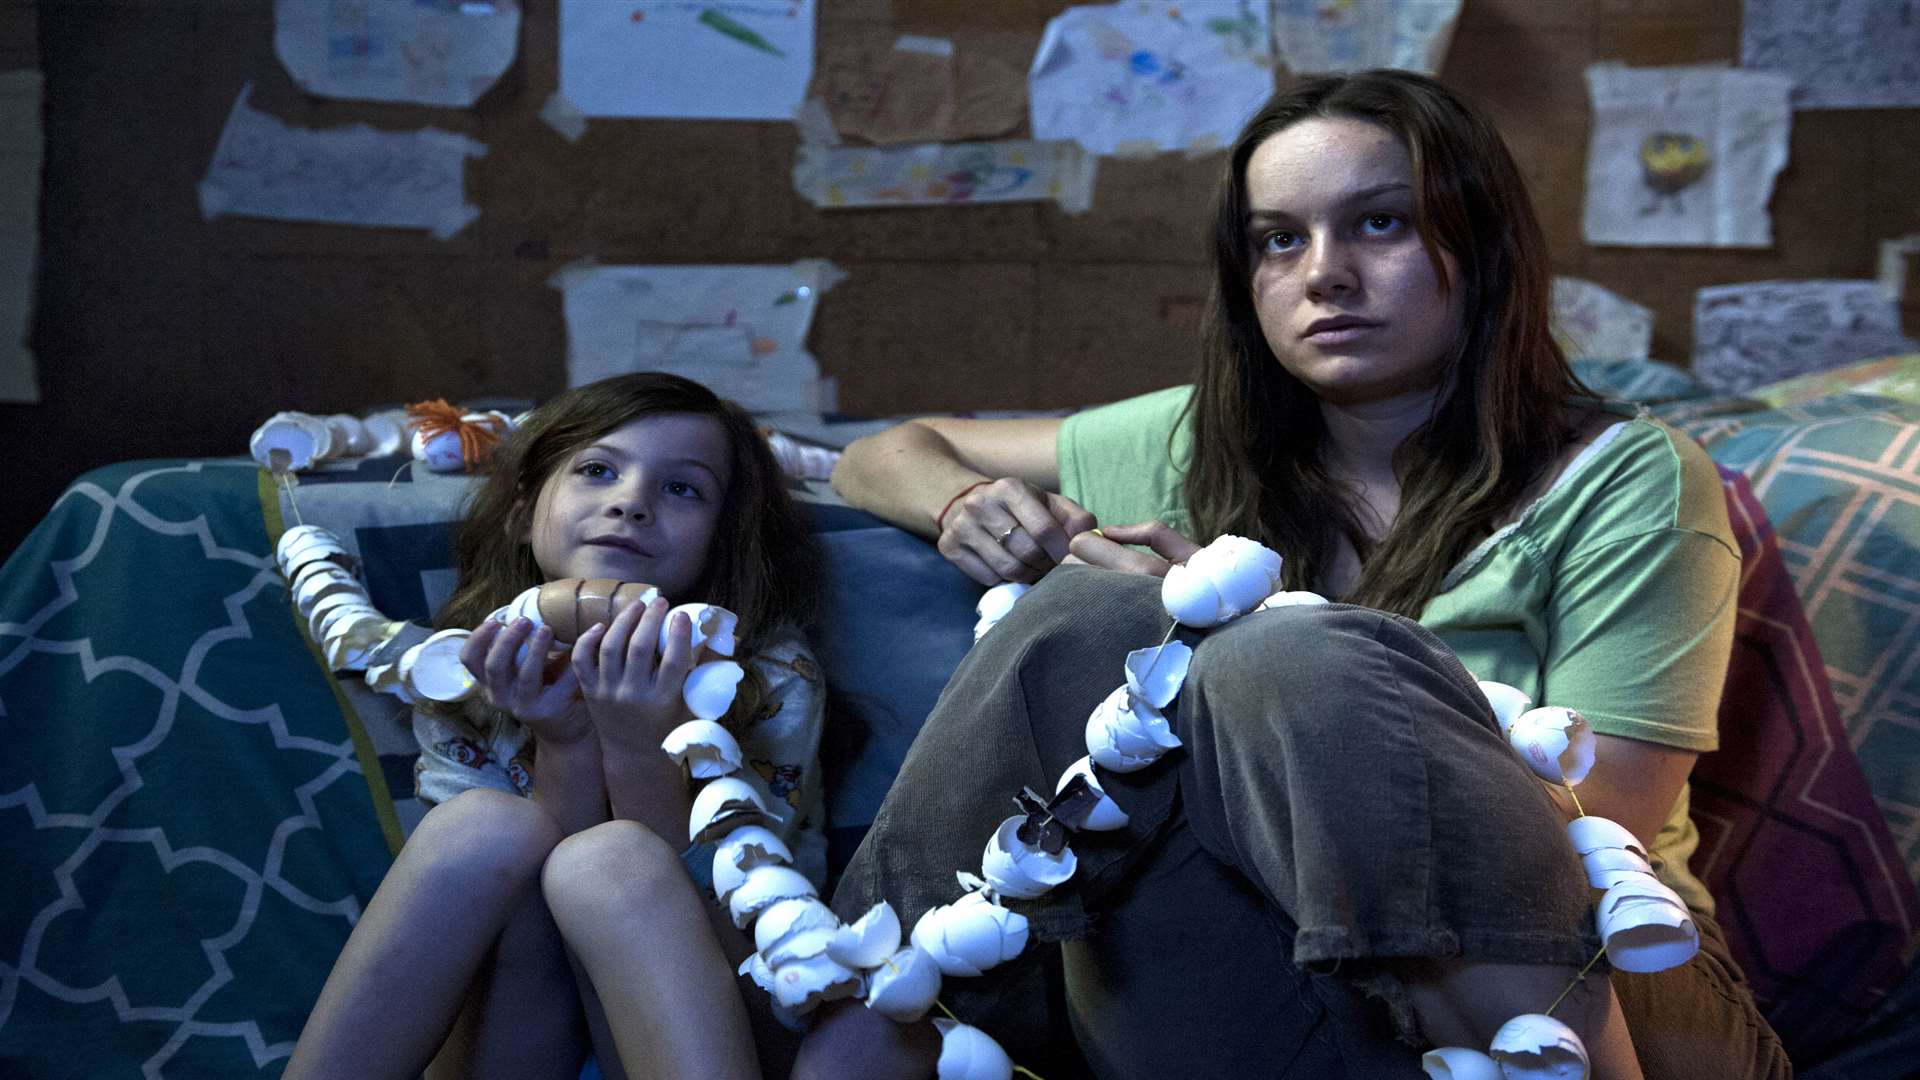 Brie Larson's role in The Room has earned her an Oscar nomination. Picture: PA Photo/StudioCanal